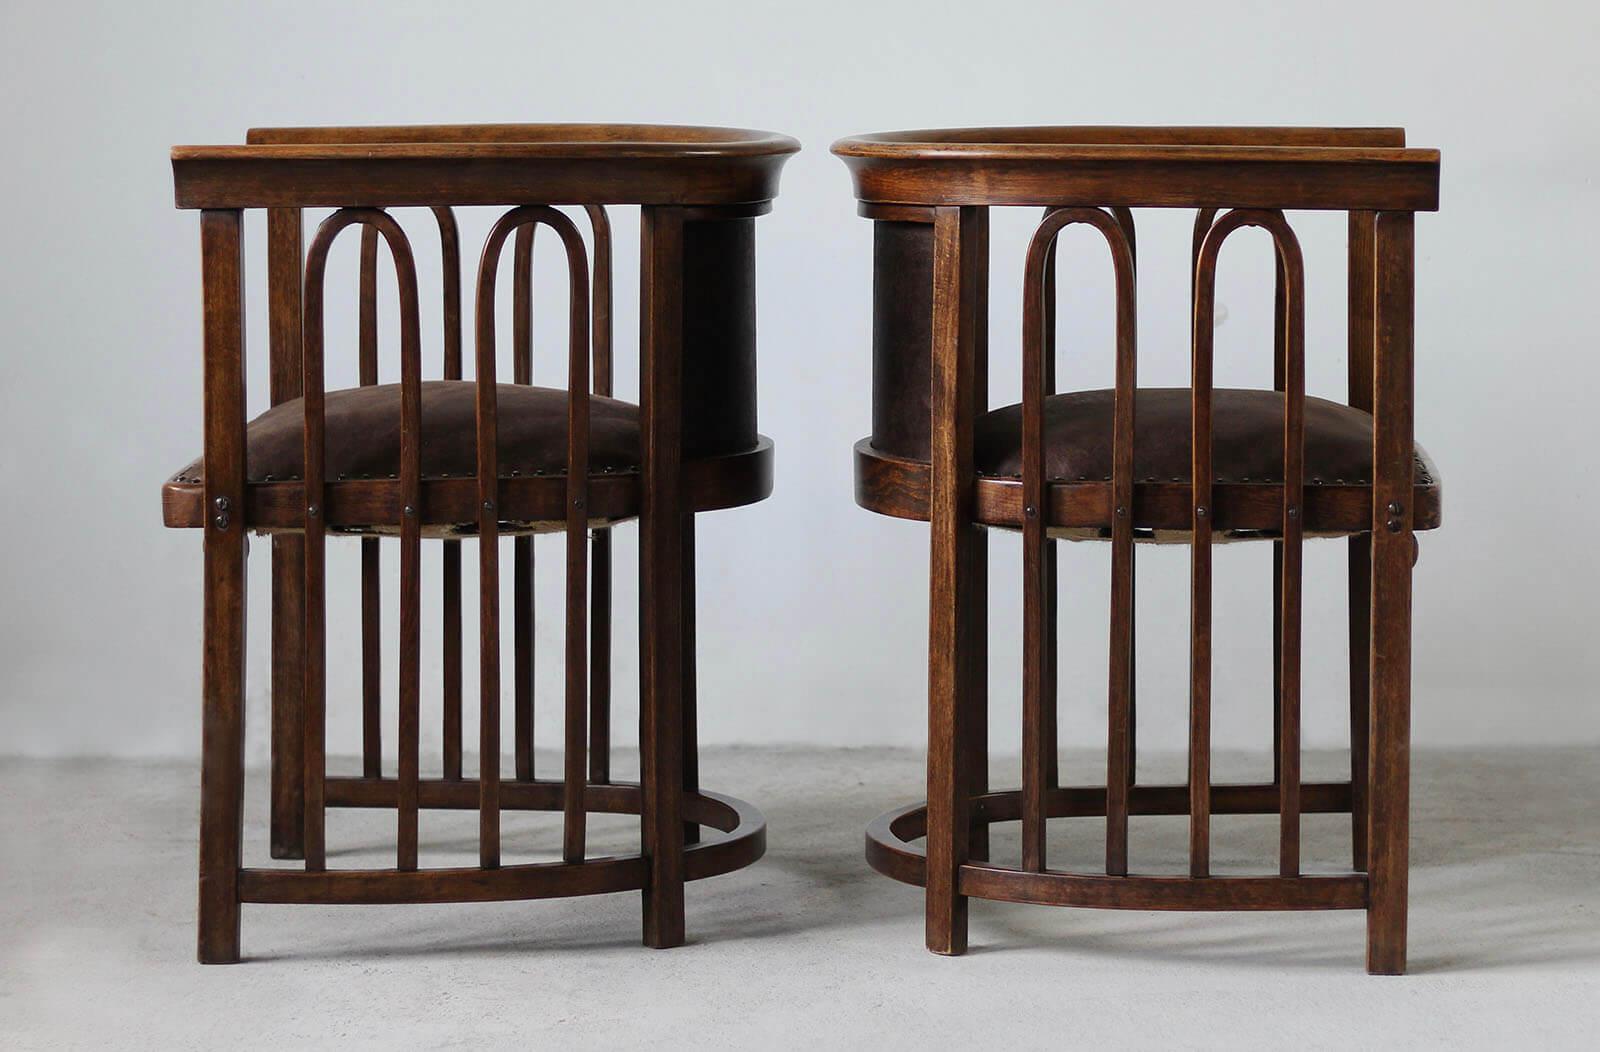 Set of 2 Armchairs designed by J. Hoffman, Model No. 423, Early 20th Century In Good Condition For Sale In Wrocław, Poland